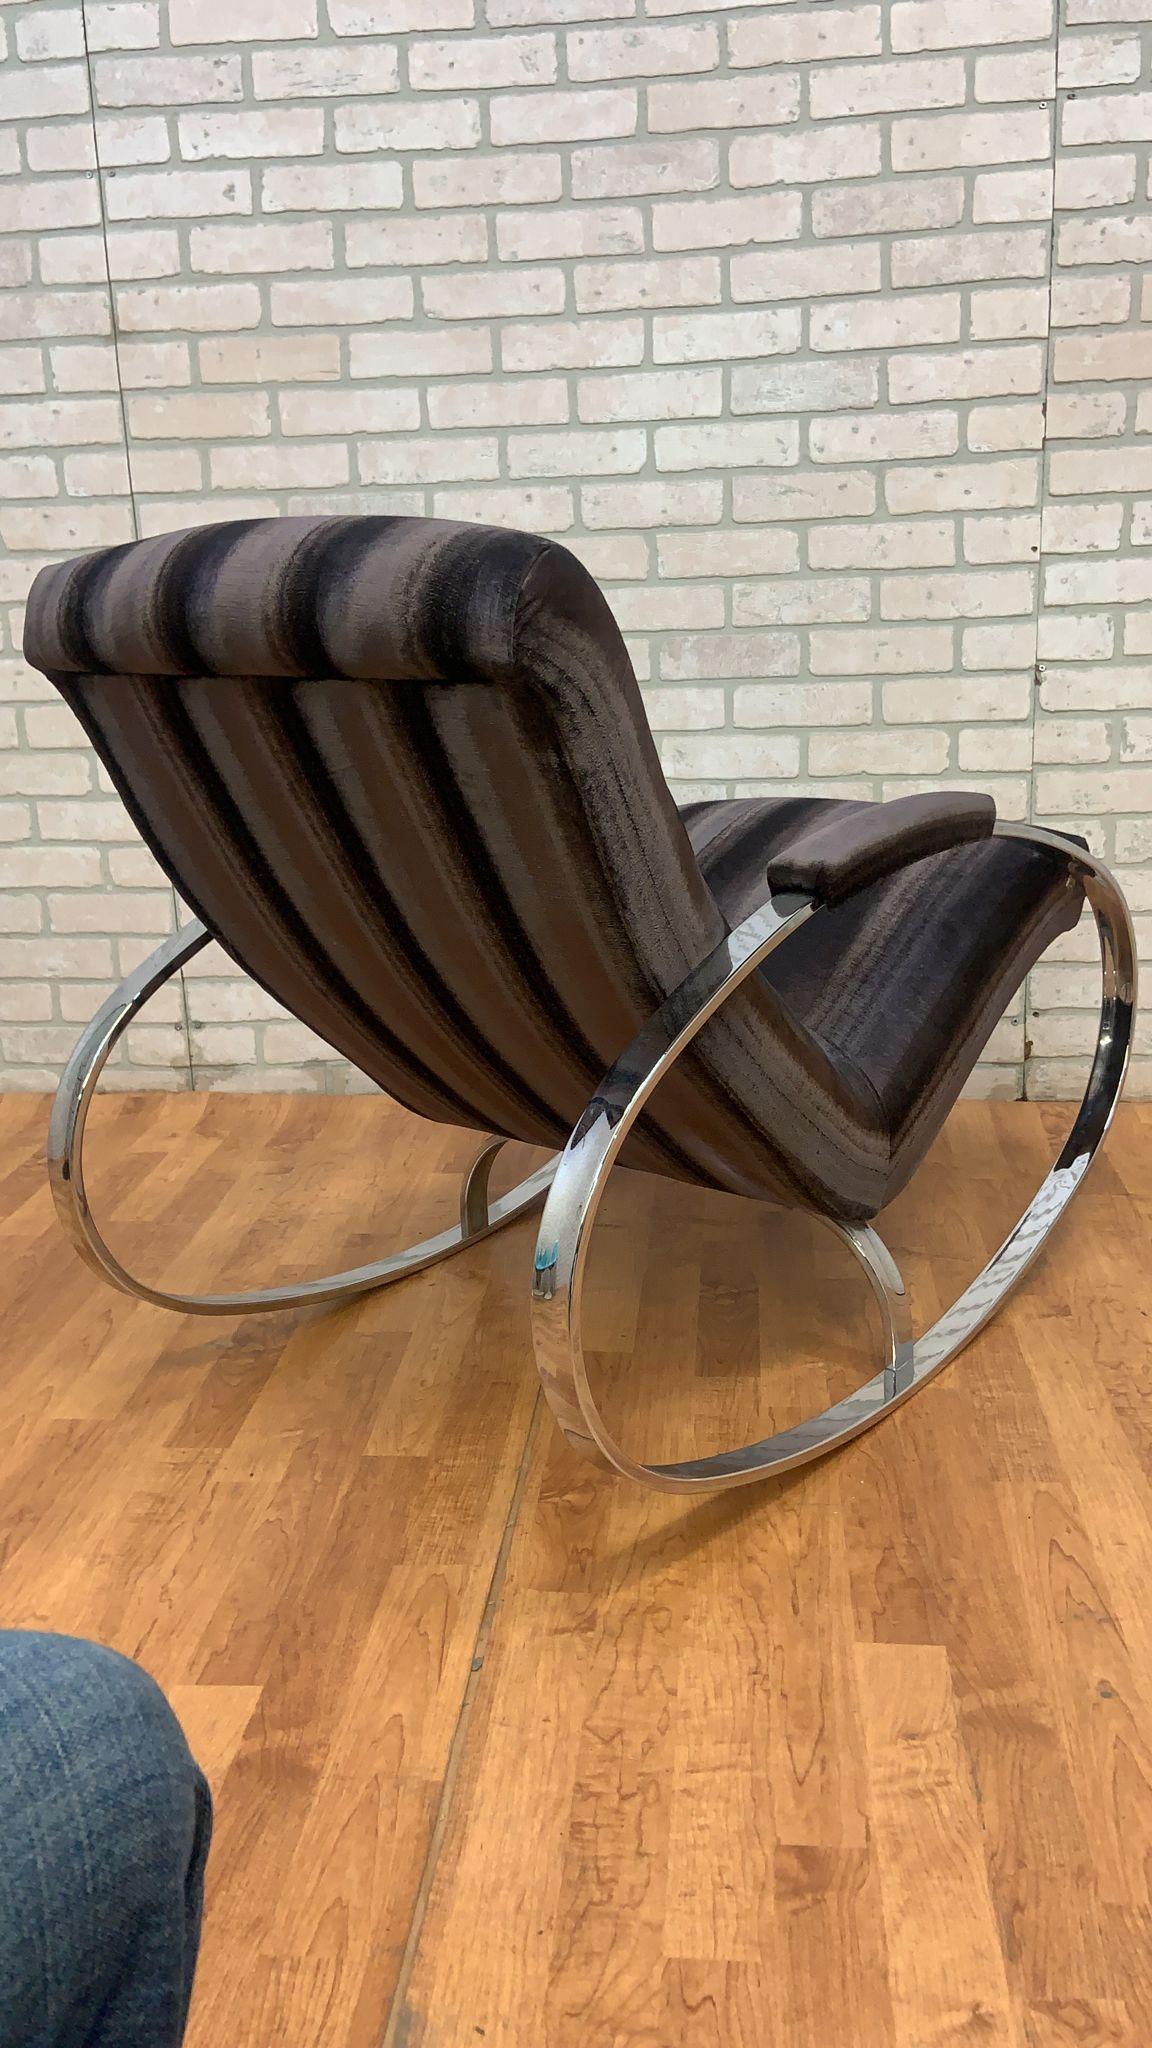 Midcentury Milo Baughman Chrome Flat Bar Oval Rocking Chair Newly Upholstered In Good Condition For Sale In Chicago, IL